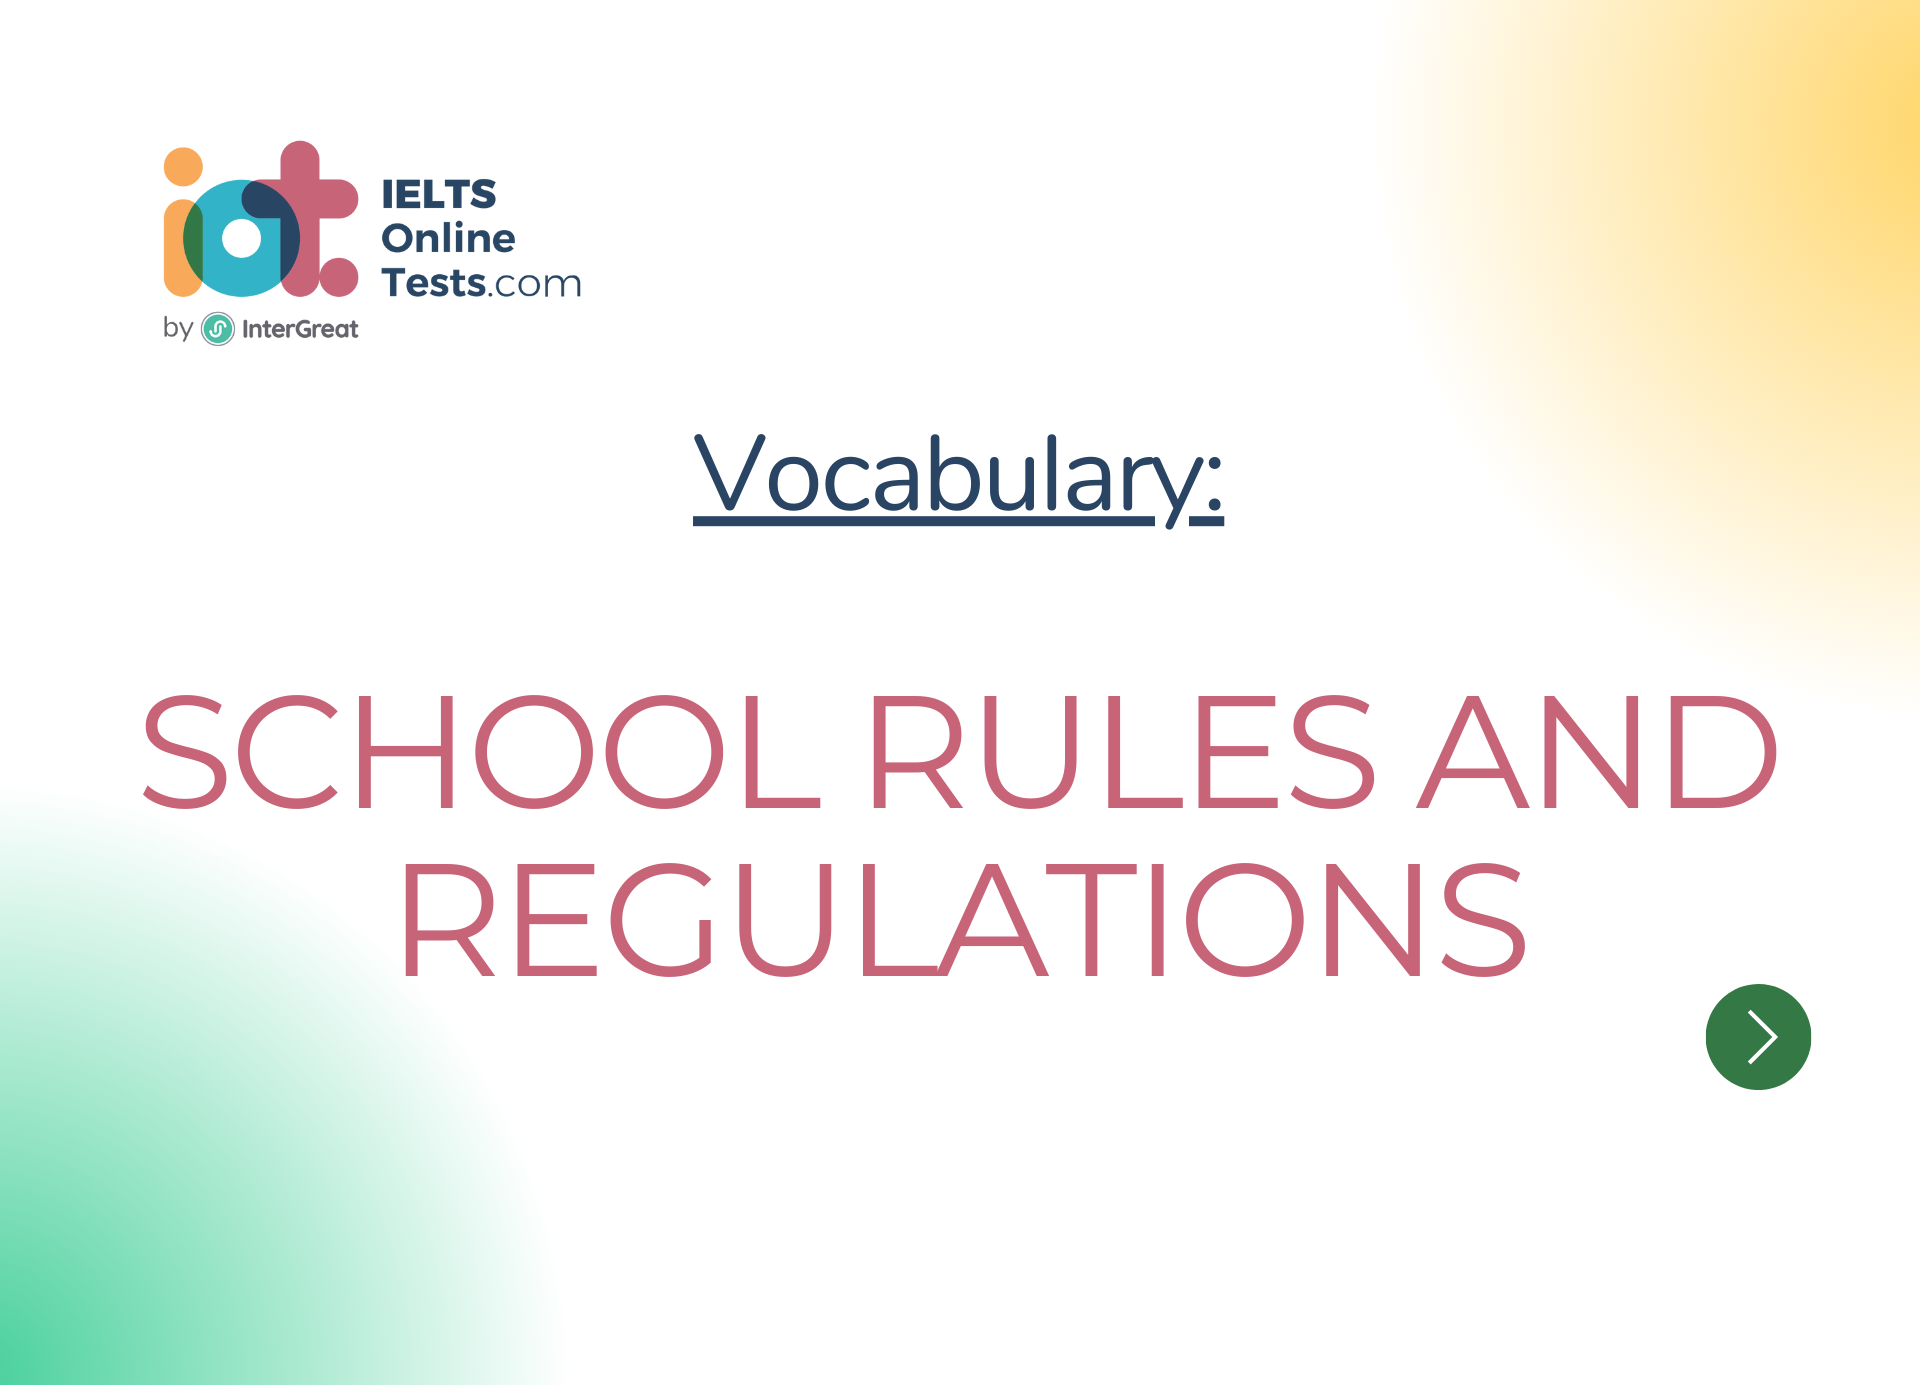 School rules and regulations